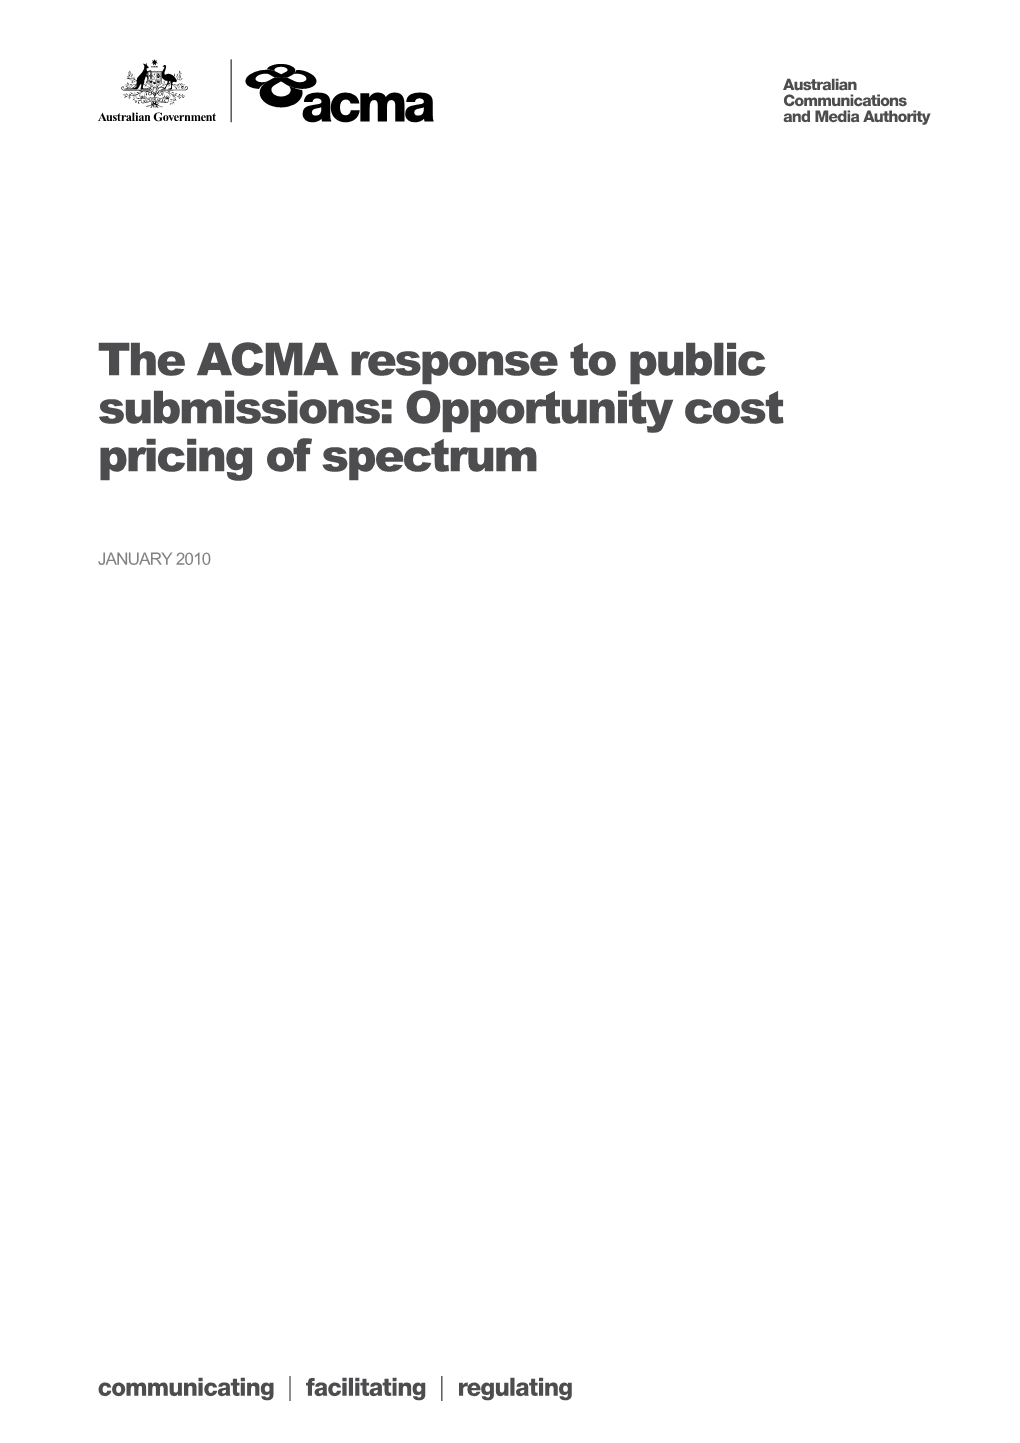 The ACMA Response to Public Submissions: Opportunity Cost Pricing of Spectrum